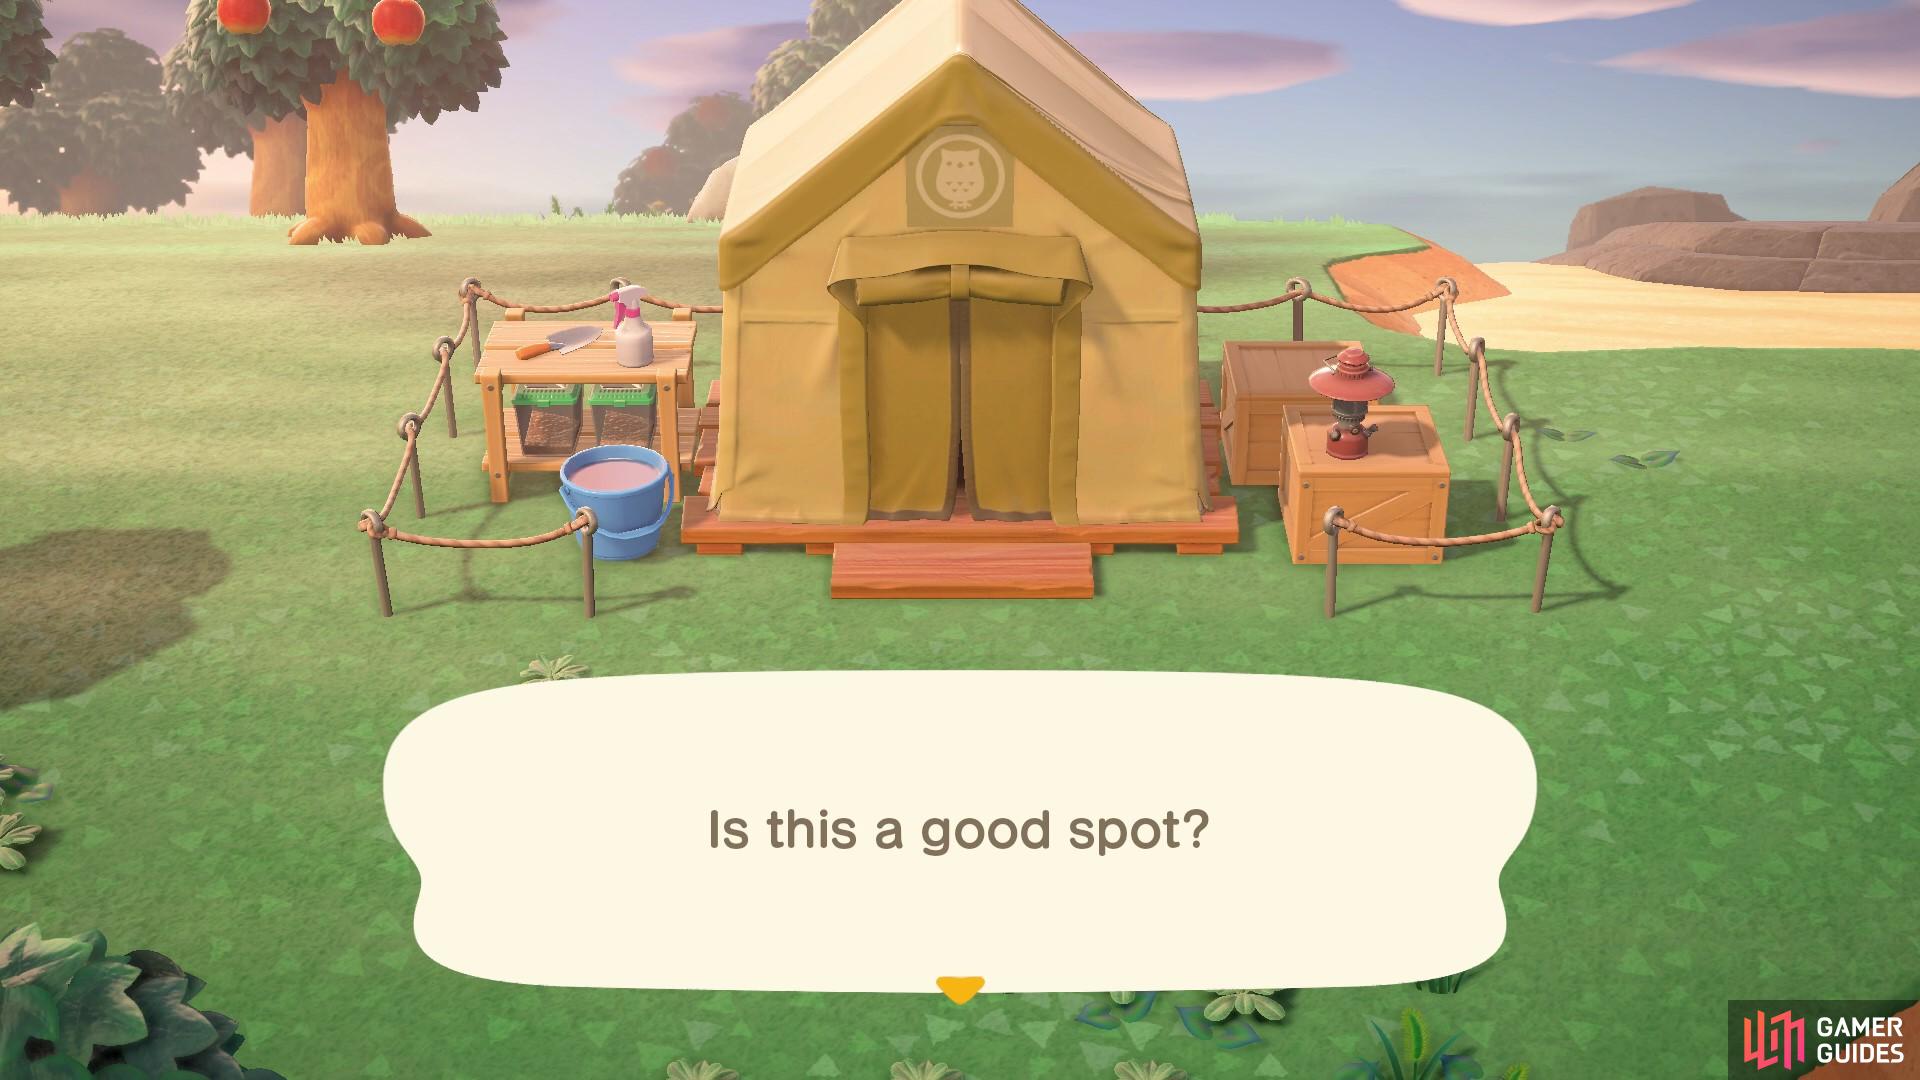 You can pitch Blathers' tent wherever you like!